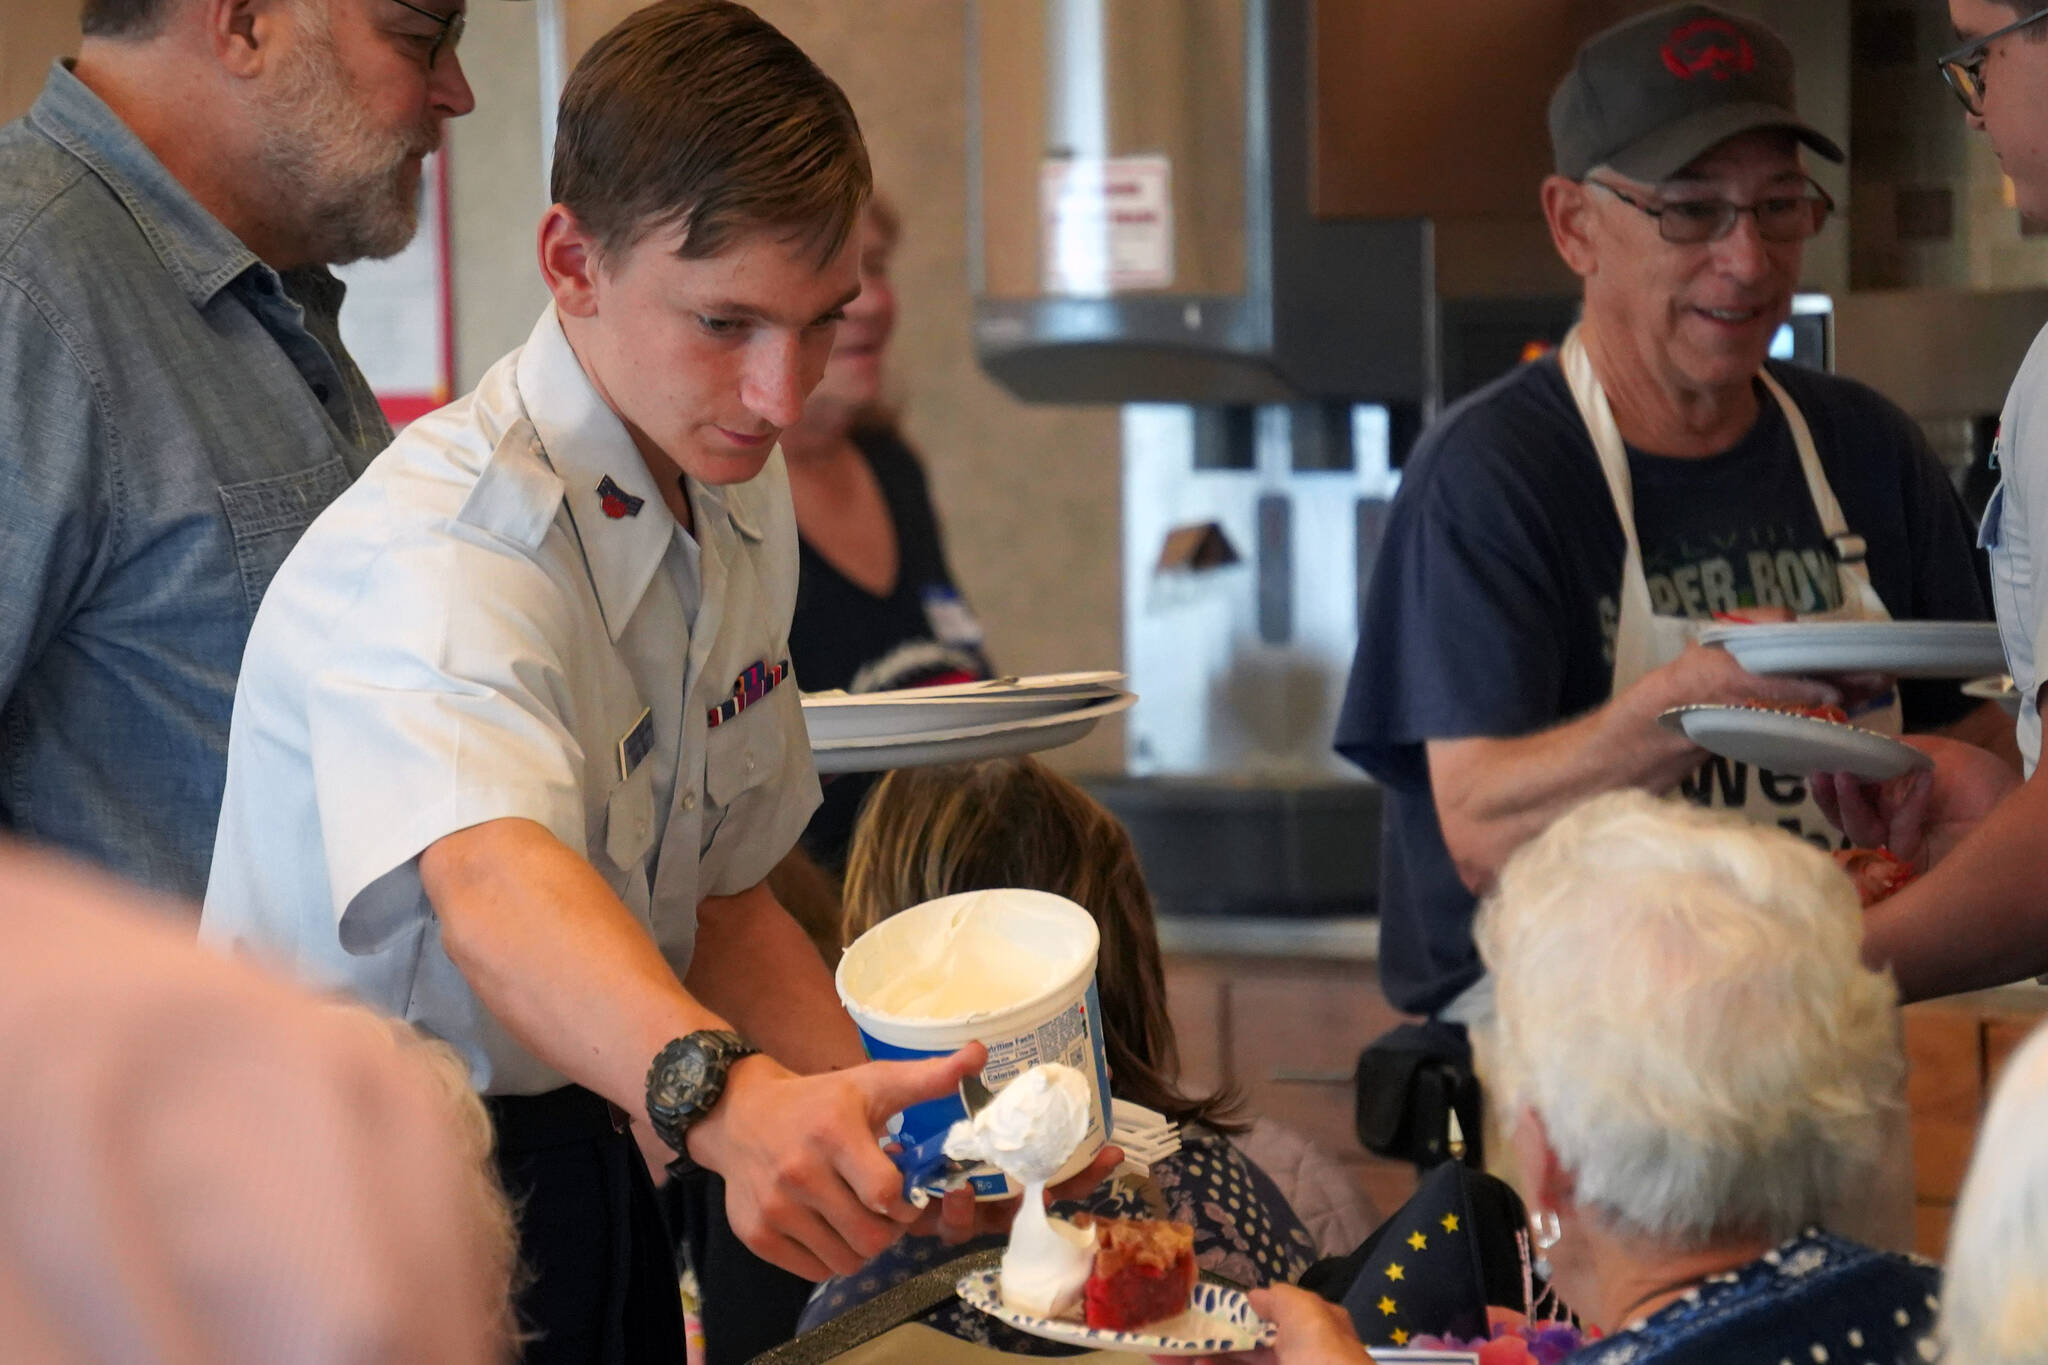 A Civil Air Patrol cadet administers a hearty dollop of Cool Whip to a slice of pie at the Old Timer’s Luncheon at the Kenai Senior Center in Kenai, Alaska, on Thursday, Aug. 31, 2023. (Jake Dye/Peninsula Clarion)